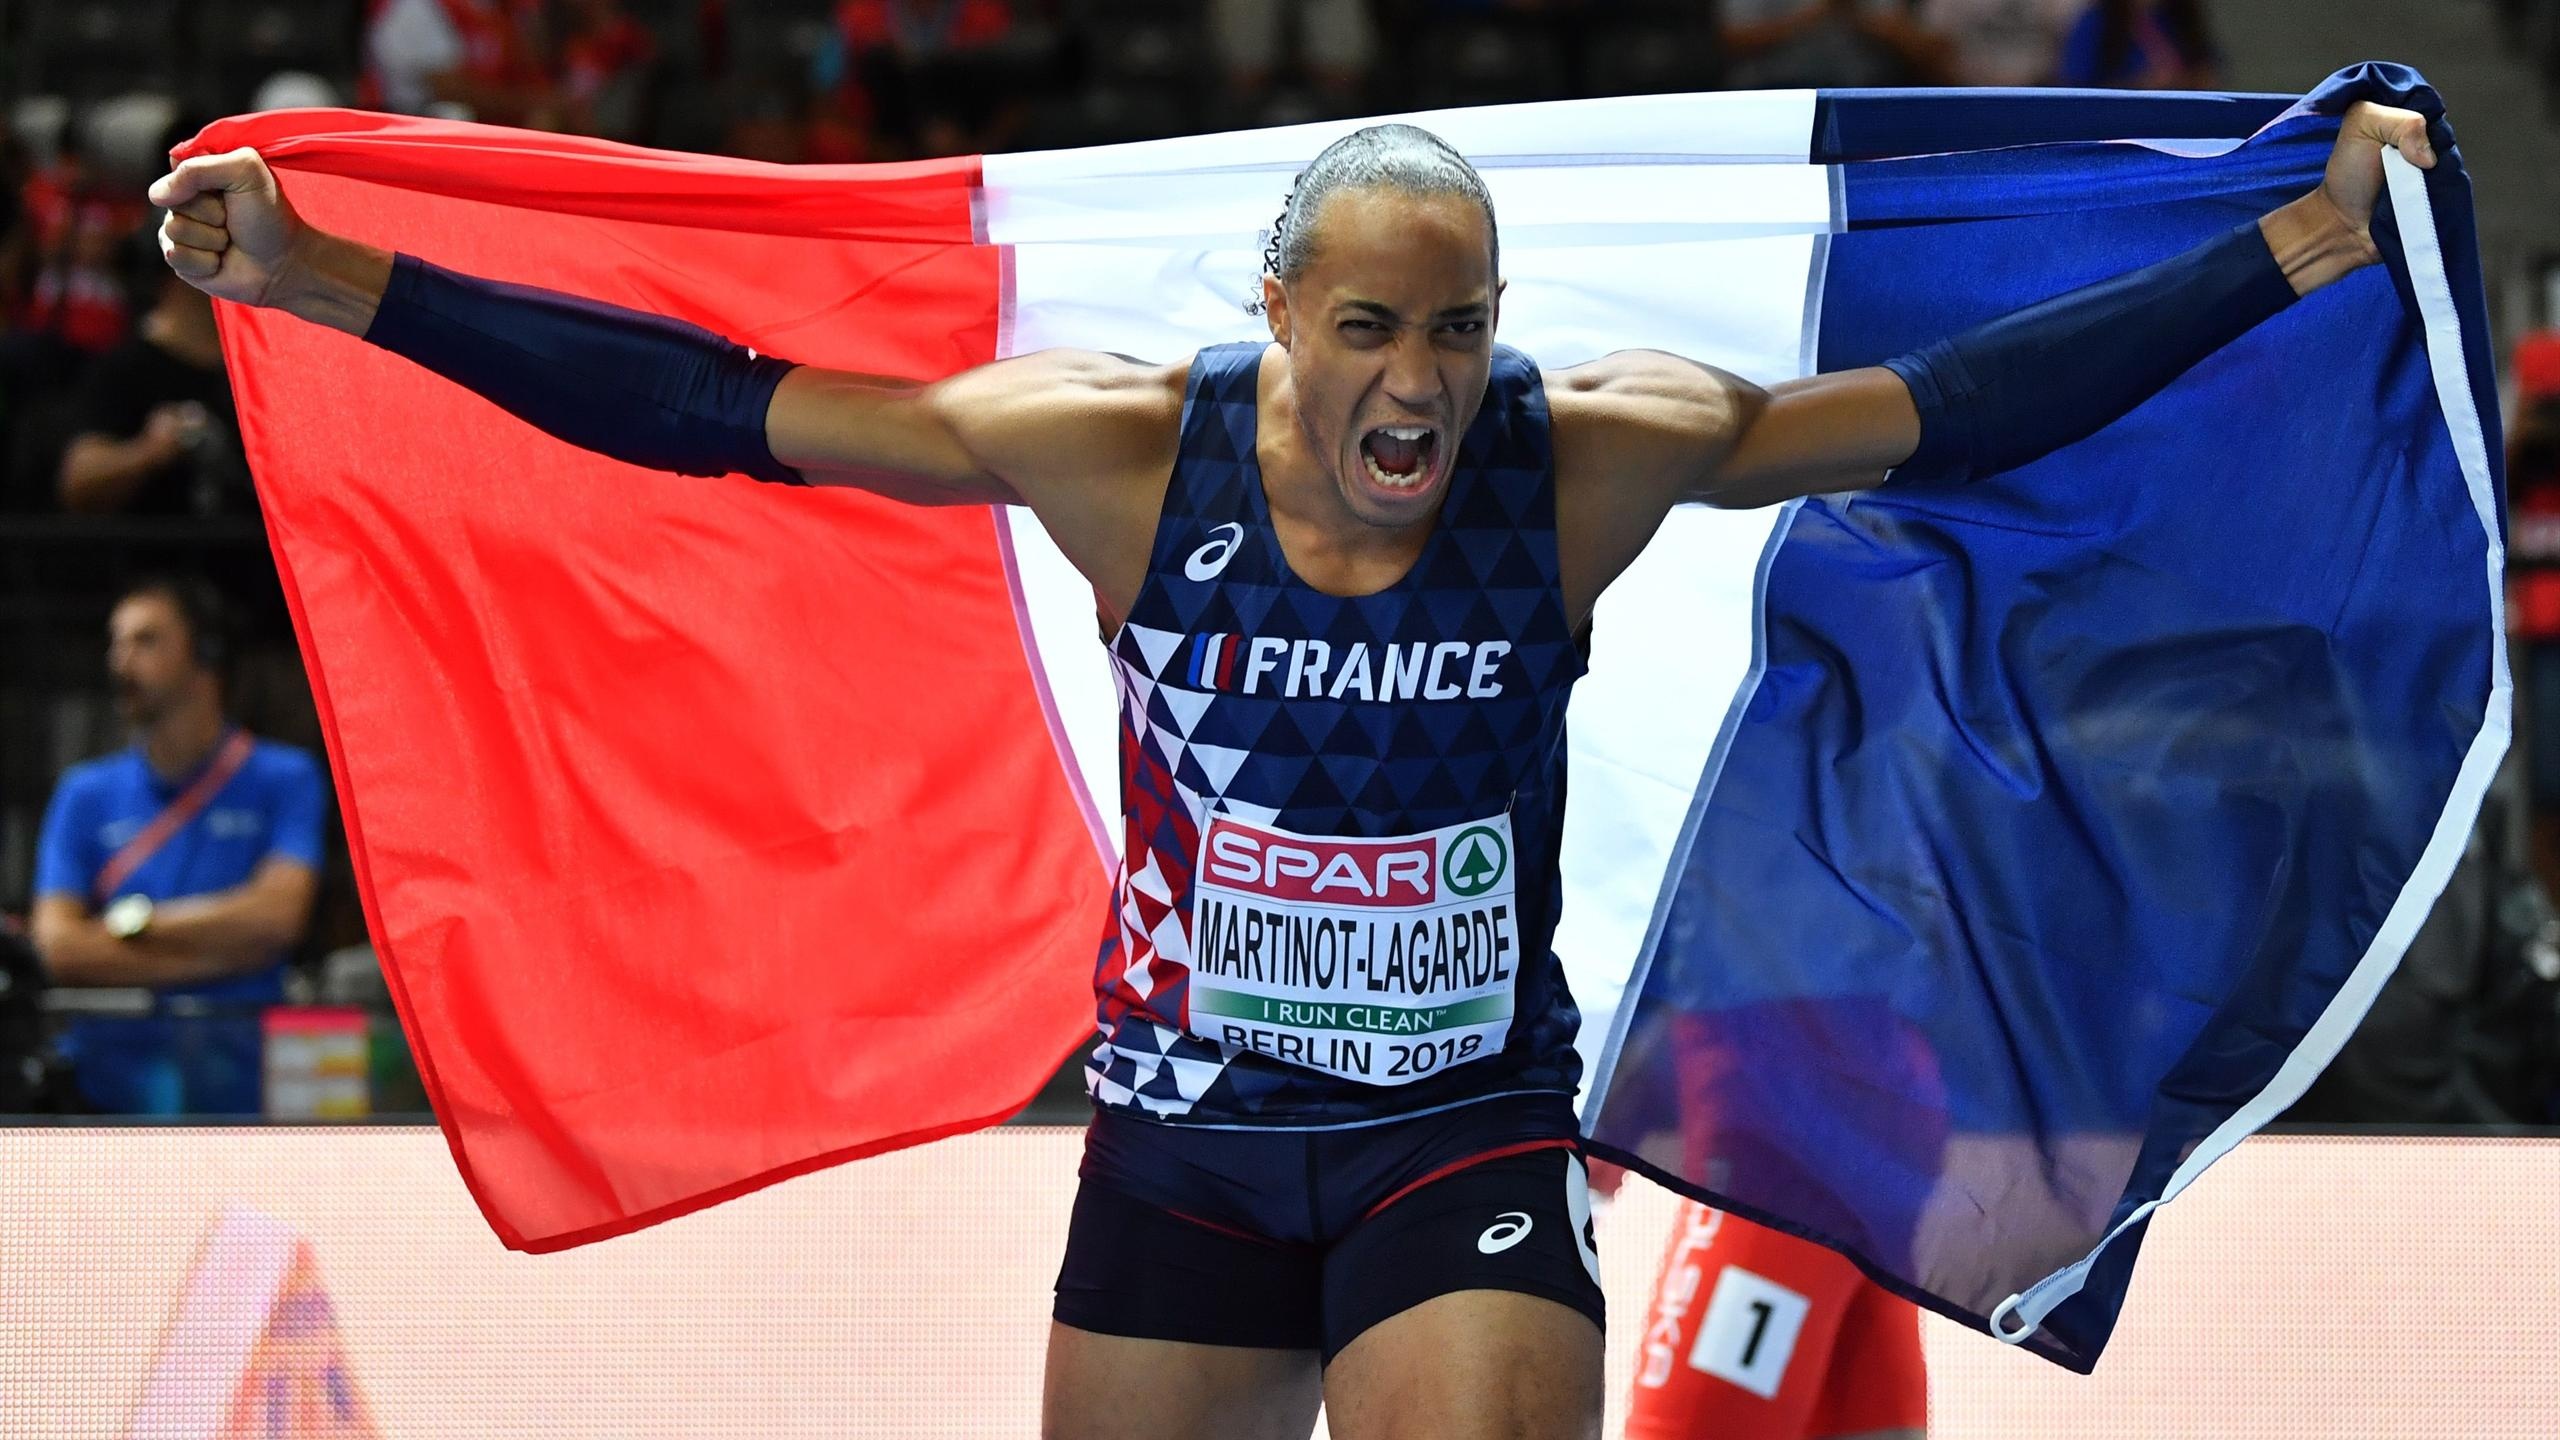 Pascal Martinot-Lagarde, Athletics, Sporting success, Track and field, 2560x1440 HD Desktop